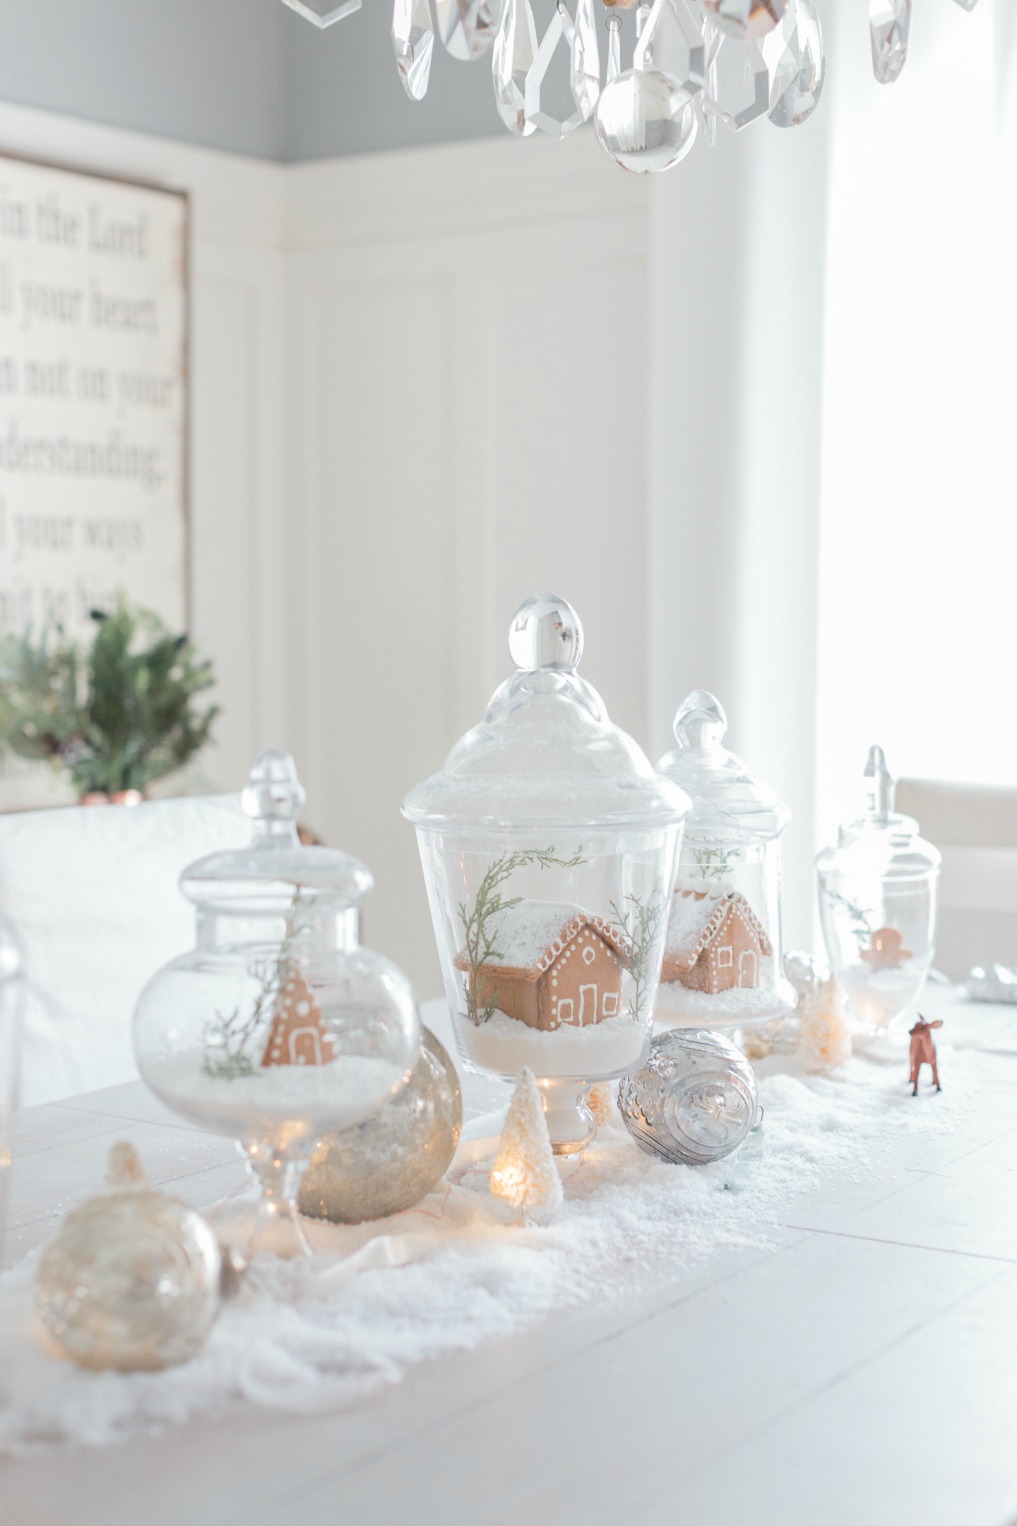 Gingerbread house apothecary jars